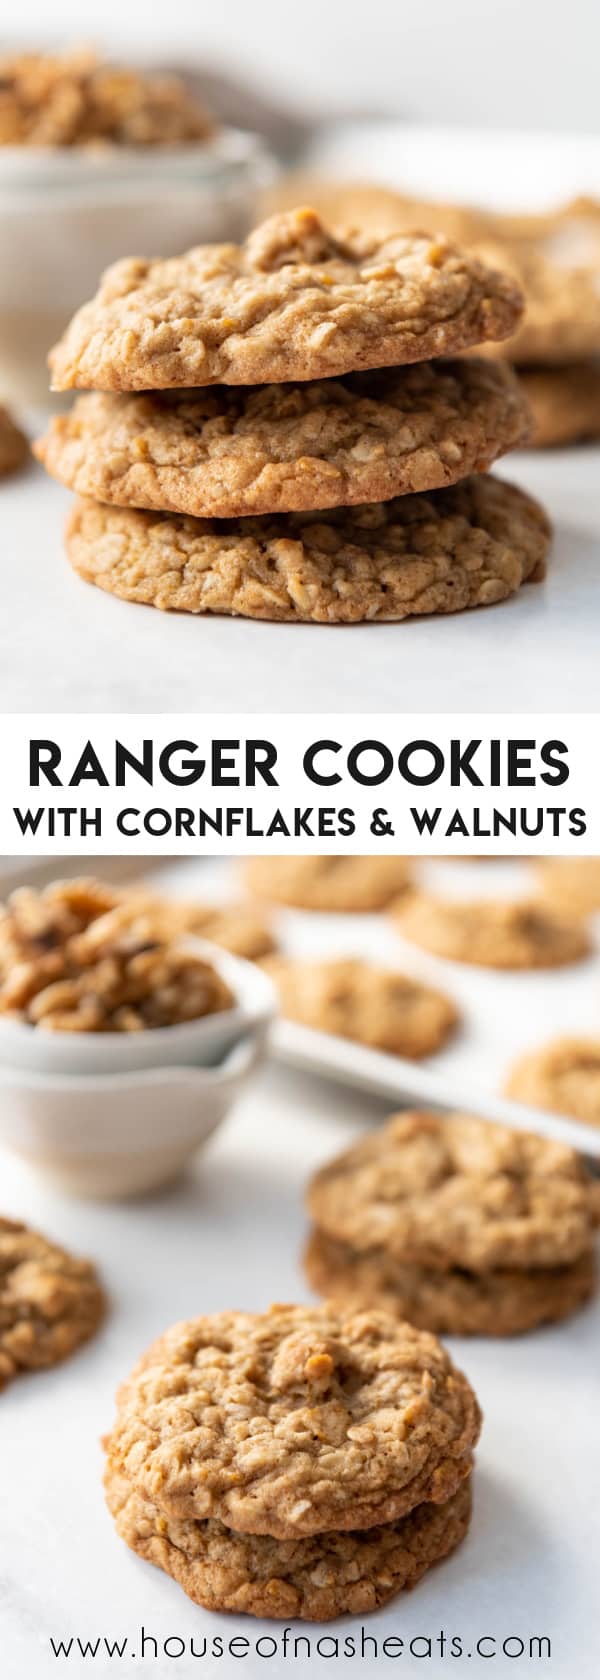 A collage of images of ranger cookies with text overlay.